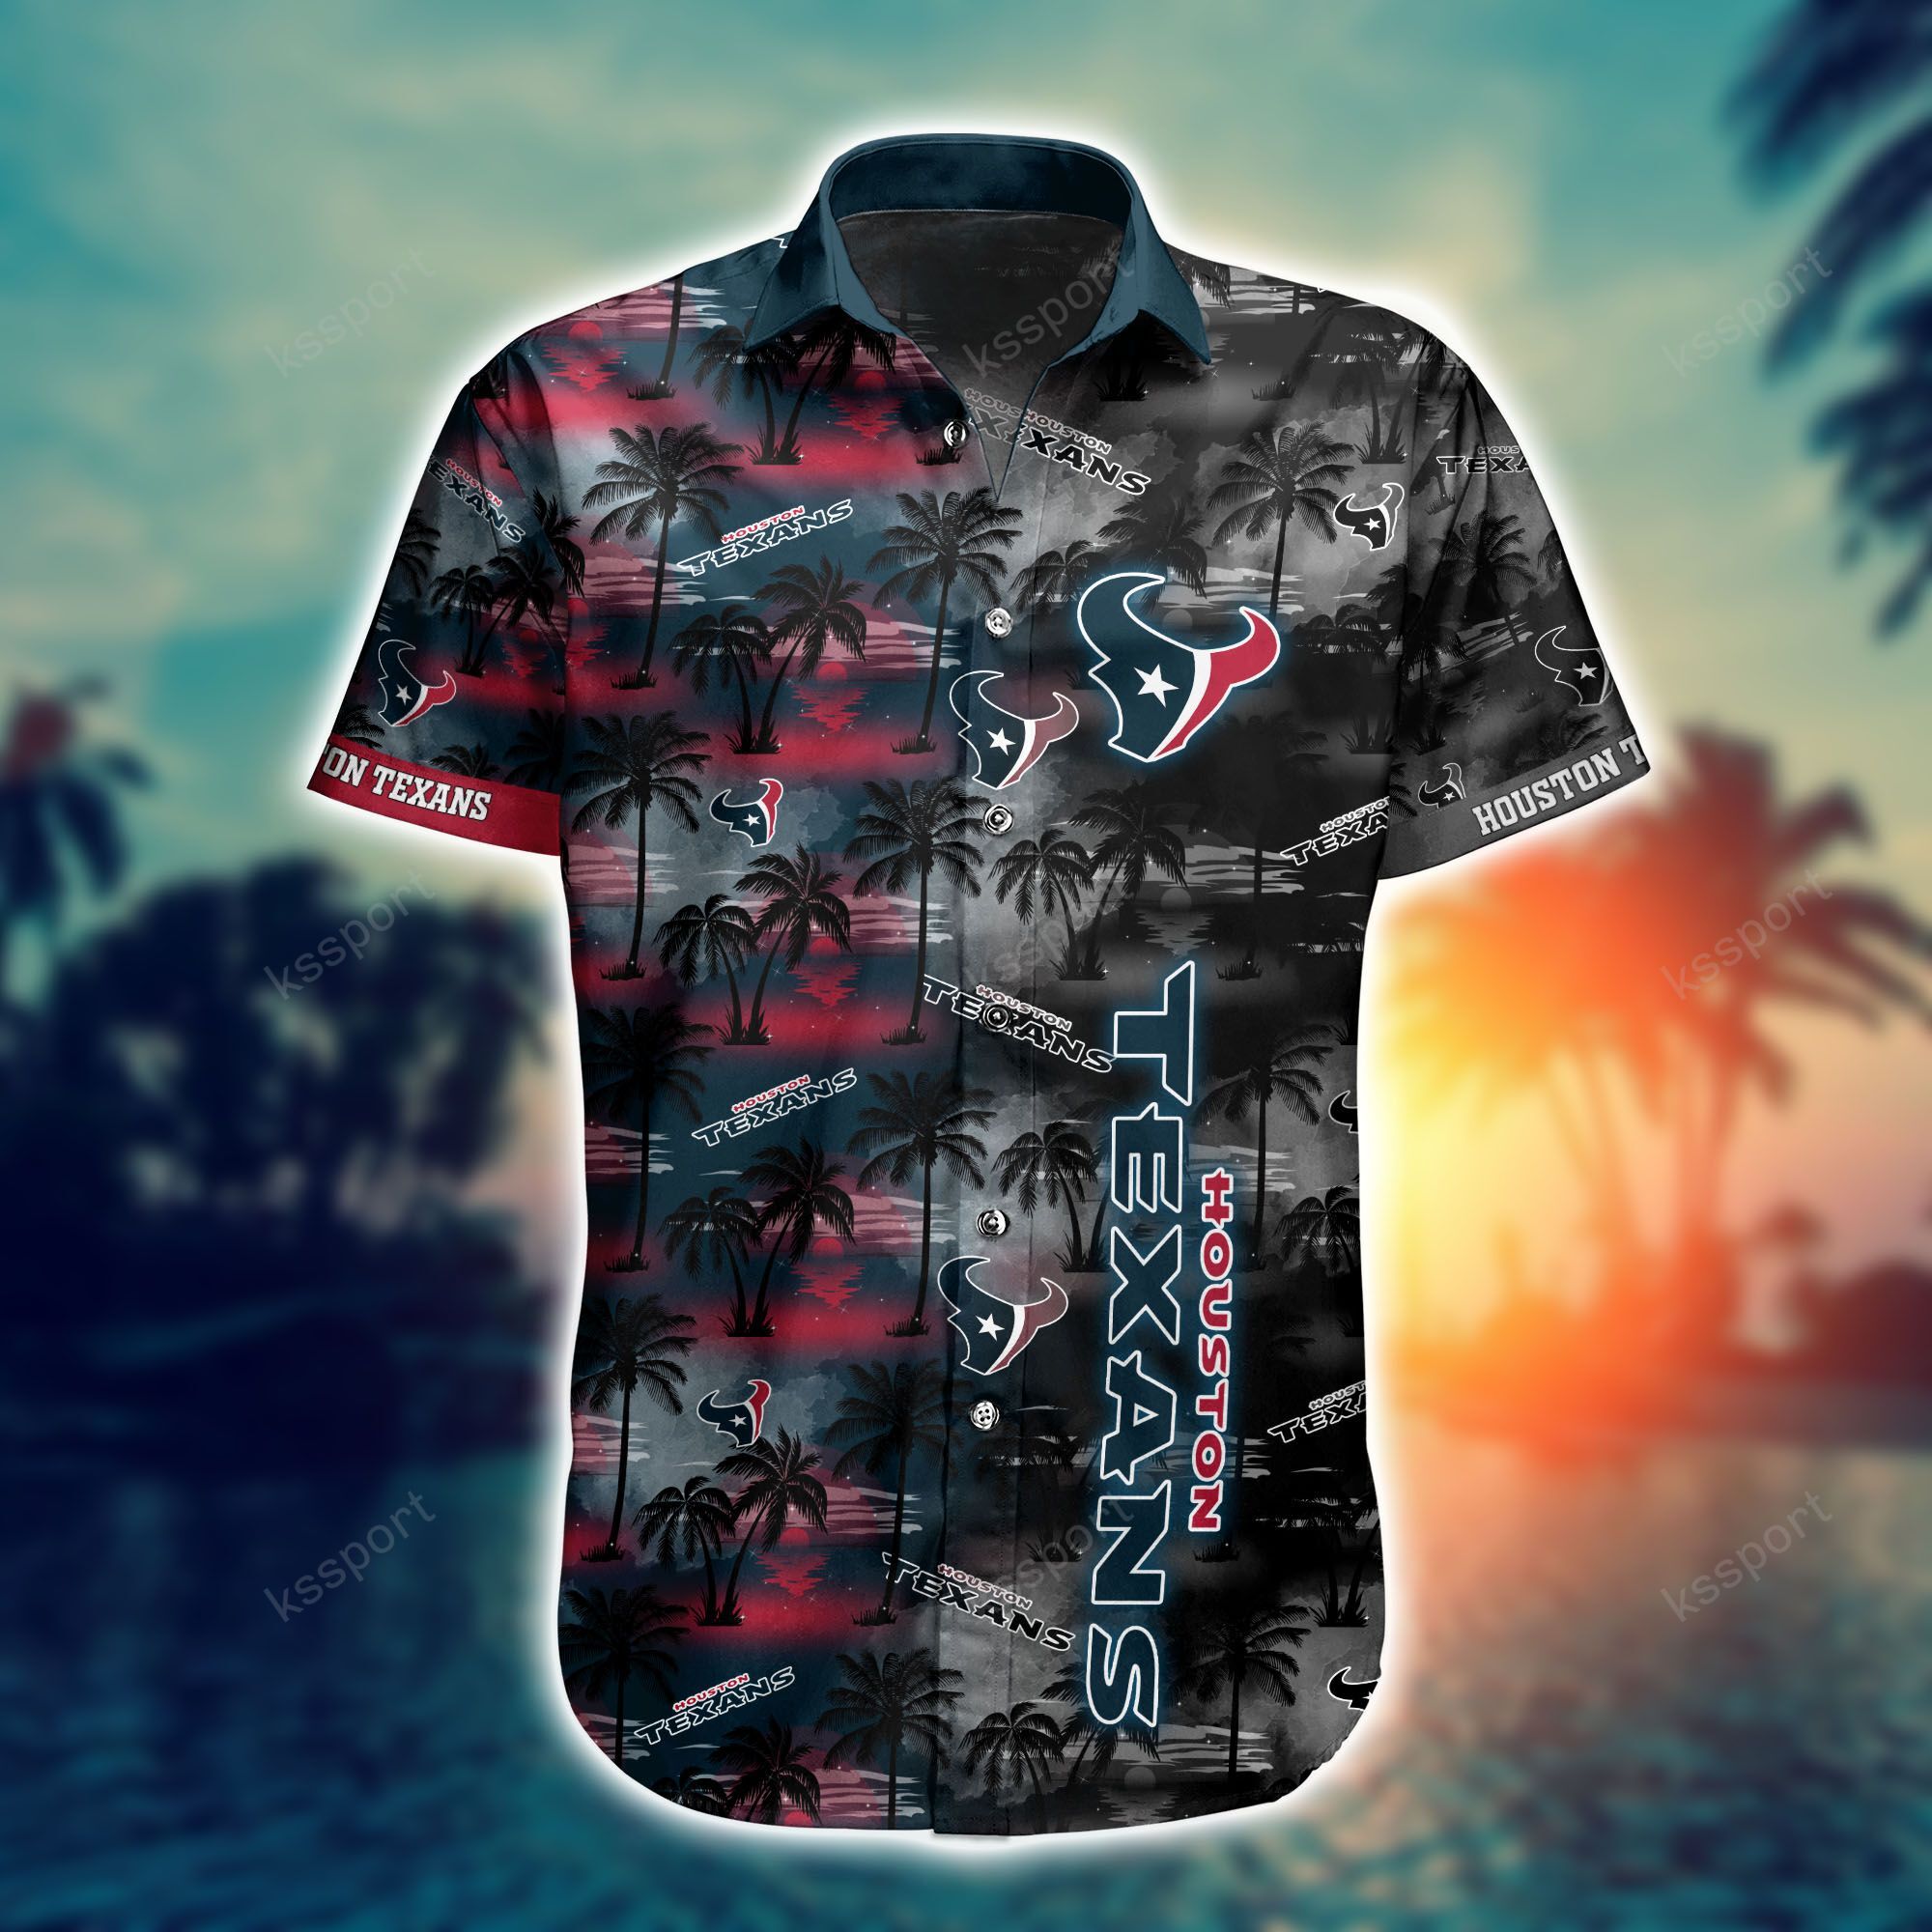 Top cool Hawaiian shirt 2022 - Make sure you get yours today before they run out! 198